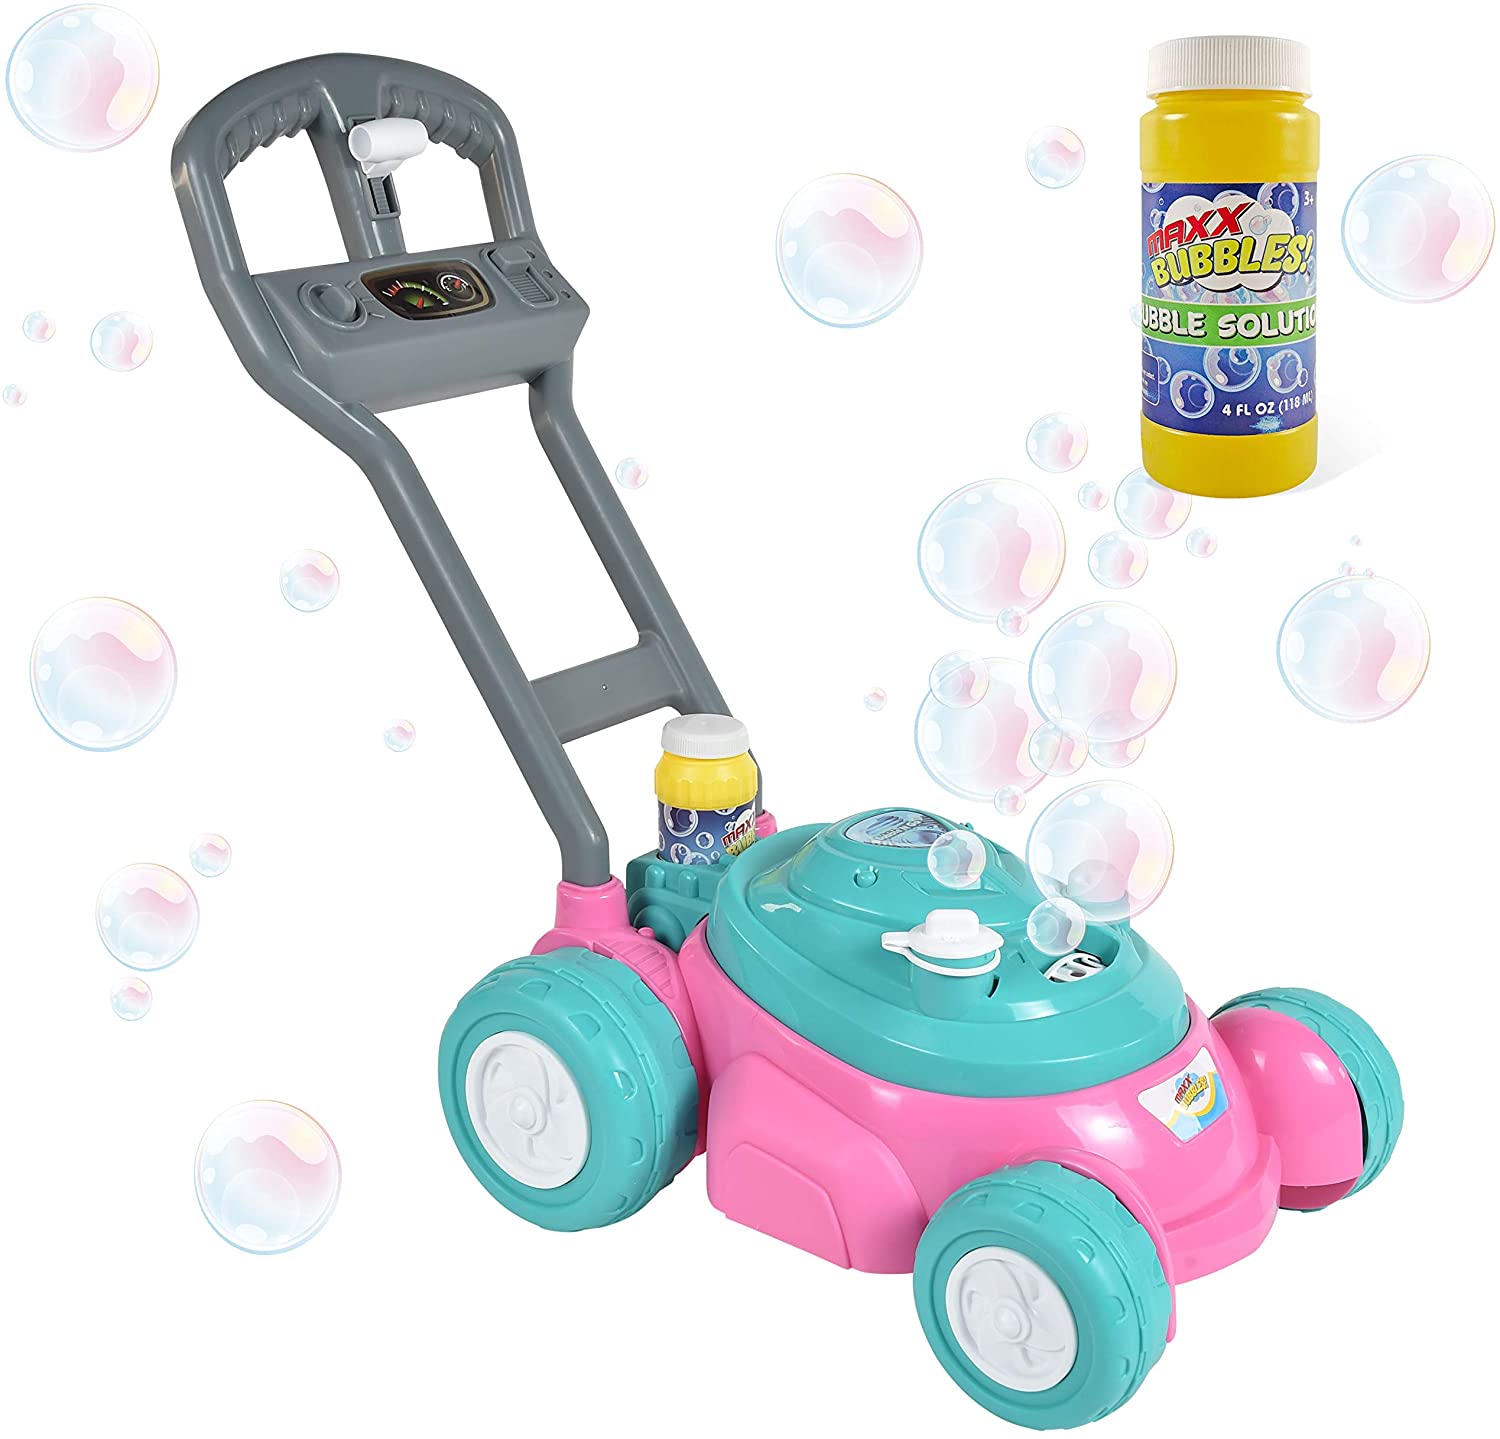 Sunny Days Entertainment Bubble-N-Go Toy Lawn Mower w/ Refill Solution (Pink) $16.21 + Free Shipping w/ Prime or on $25+